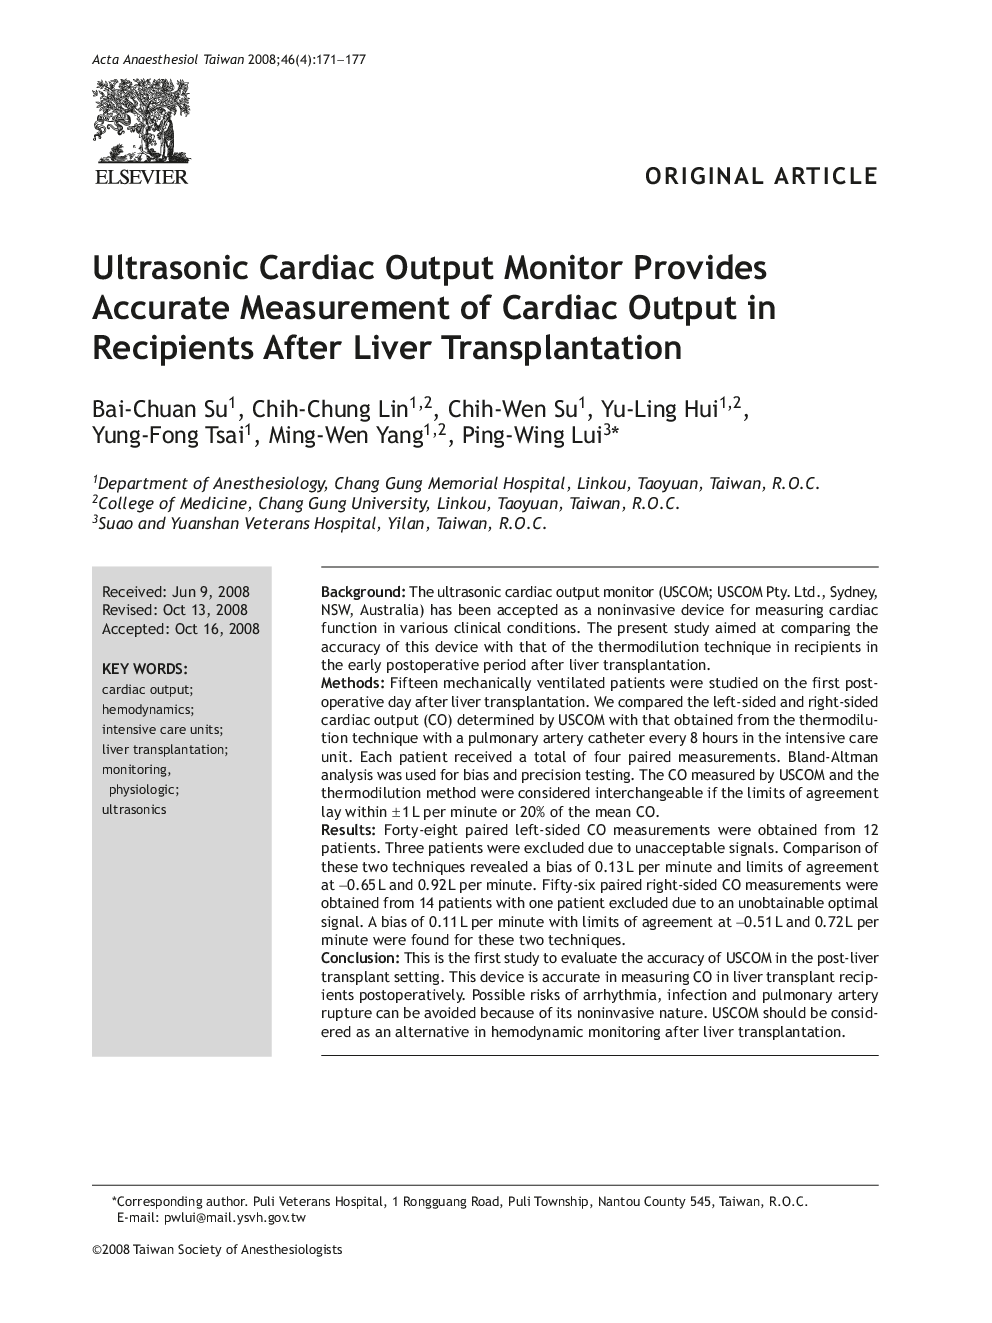 Ultrasonic Cardiac Output Monitor Provides Accurate Measurement of Cardiac Output in Recipients After Liver Transplantation